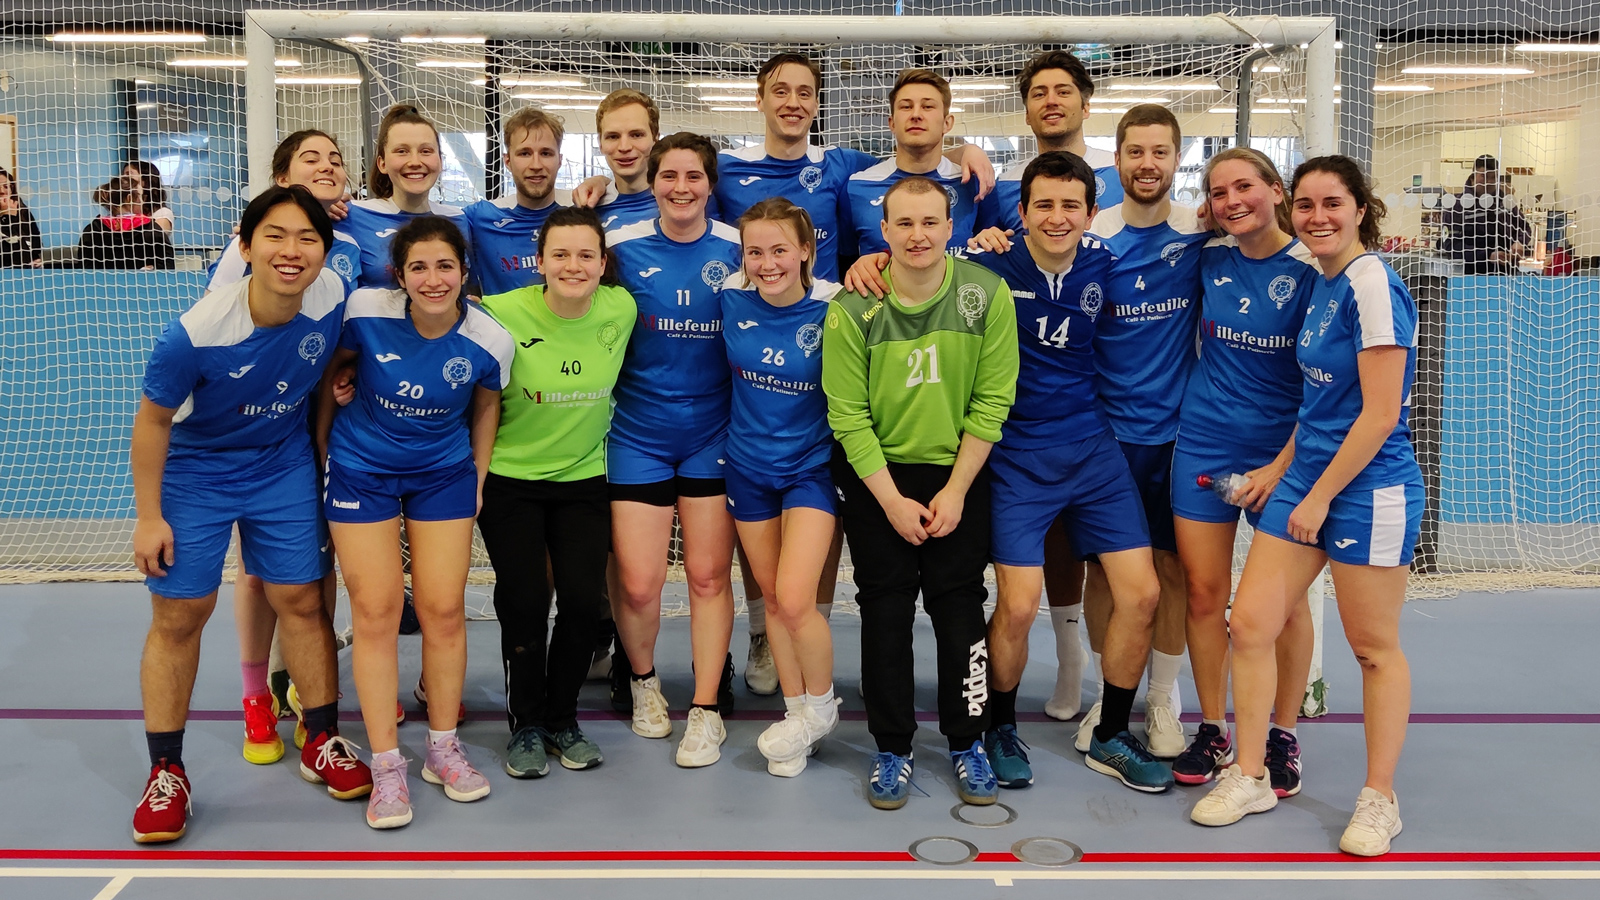 A team of handball players stand in front of a goal